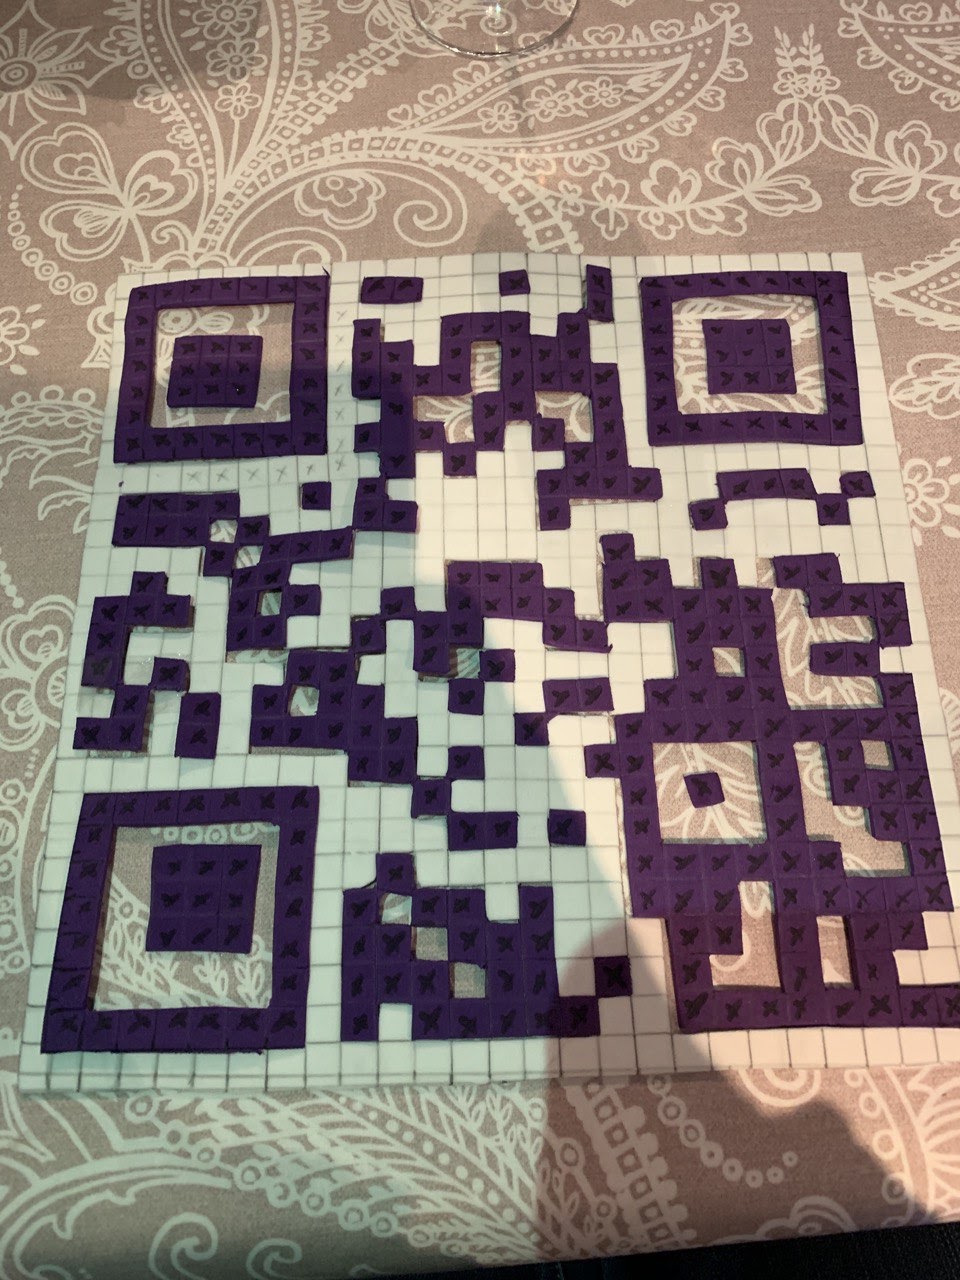 completed QR code puzzle for the unique holiday gift made with Typeform, JavaScript, and Twilio SMS API